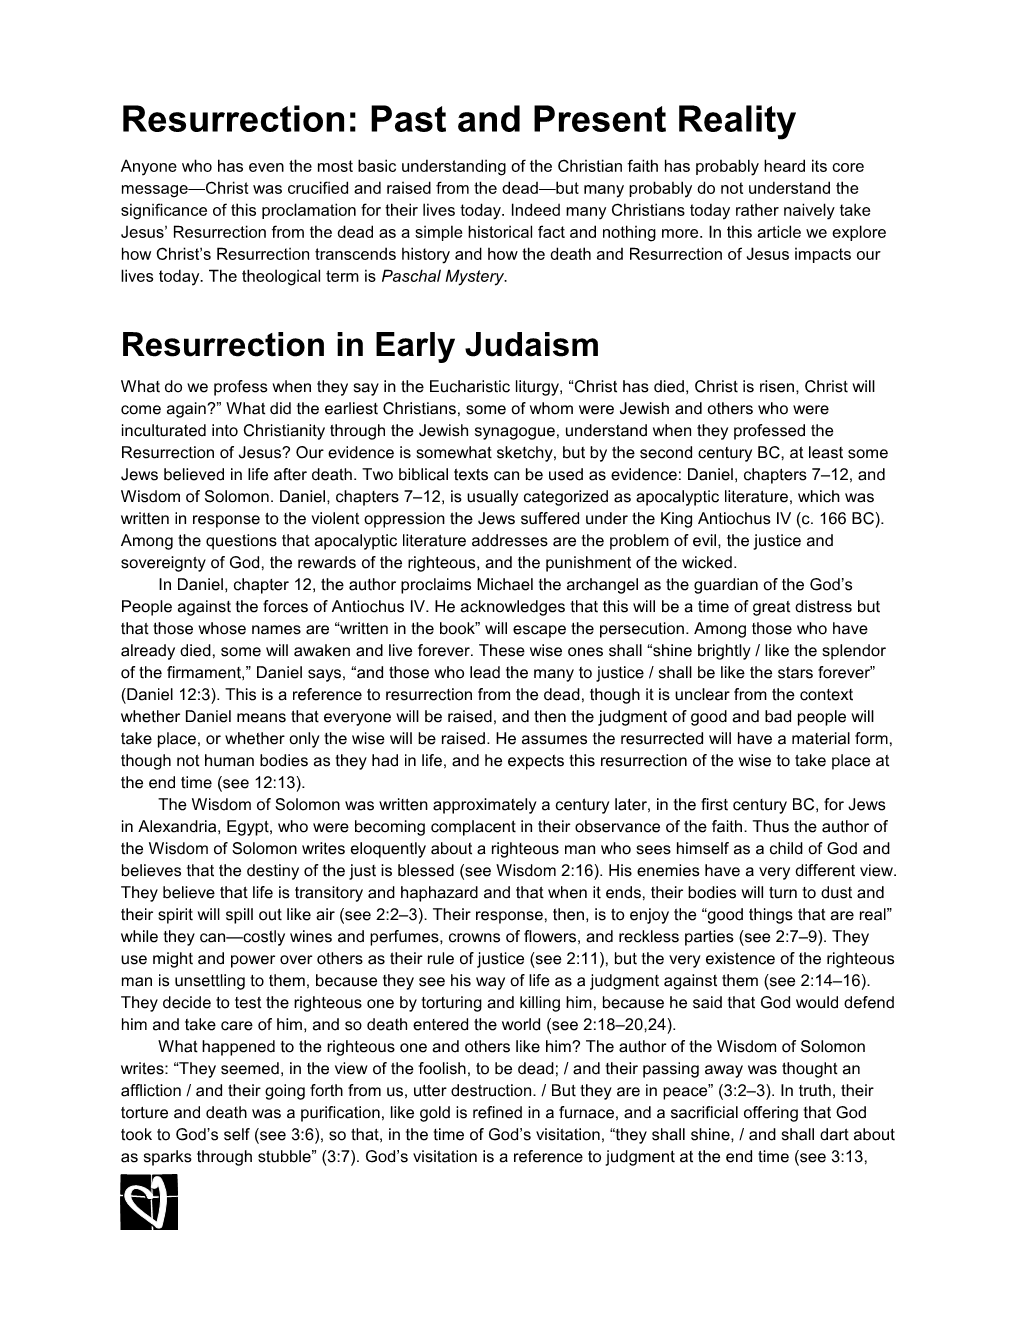 Resurrection: Past and Present Realitypage 1